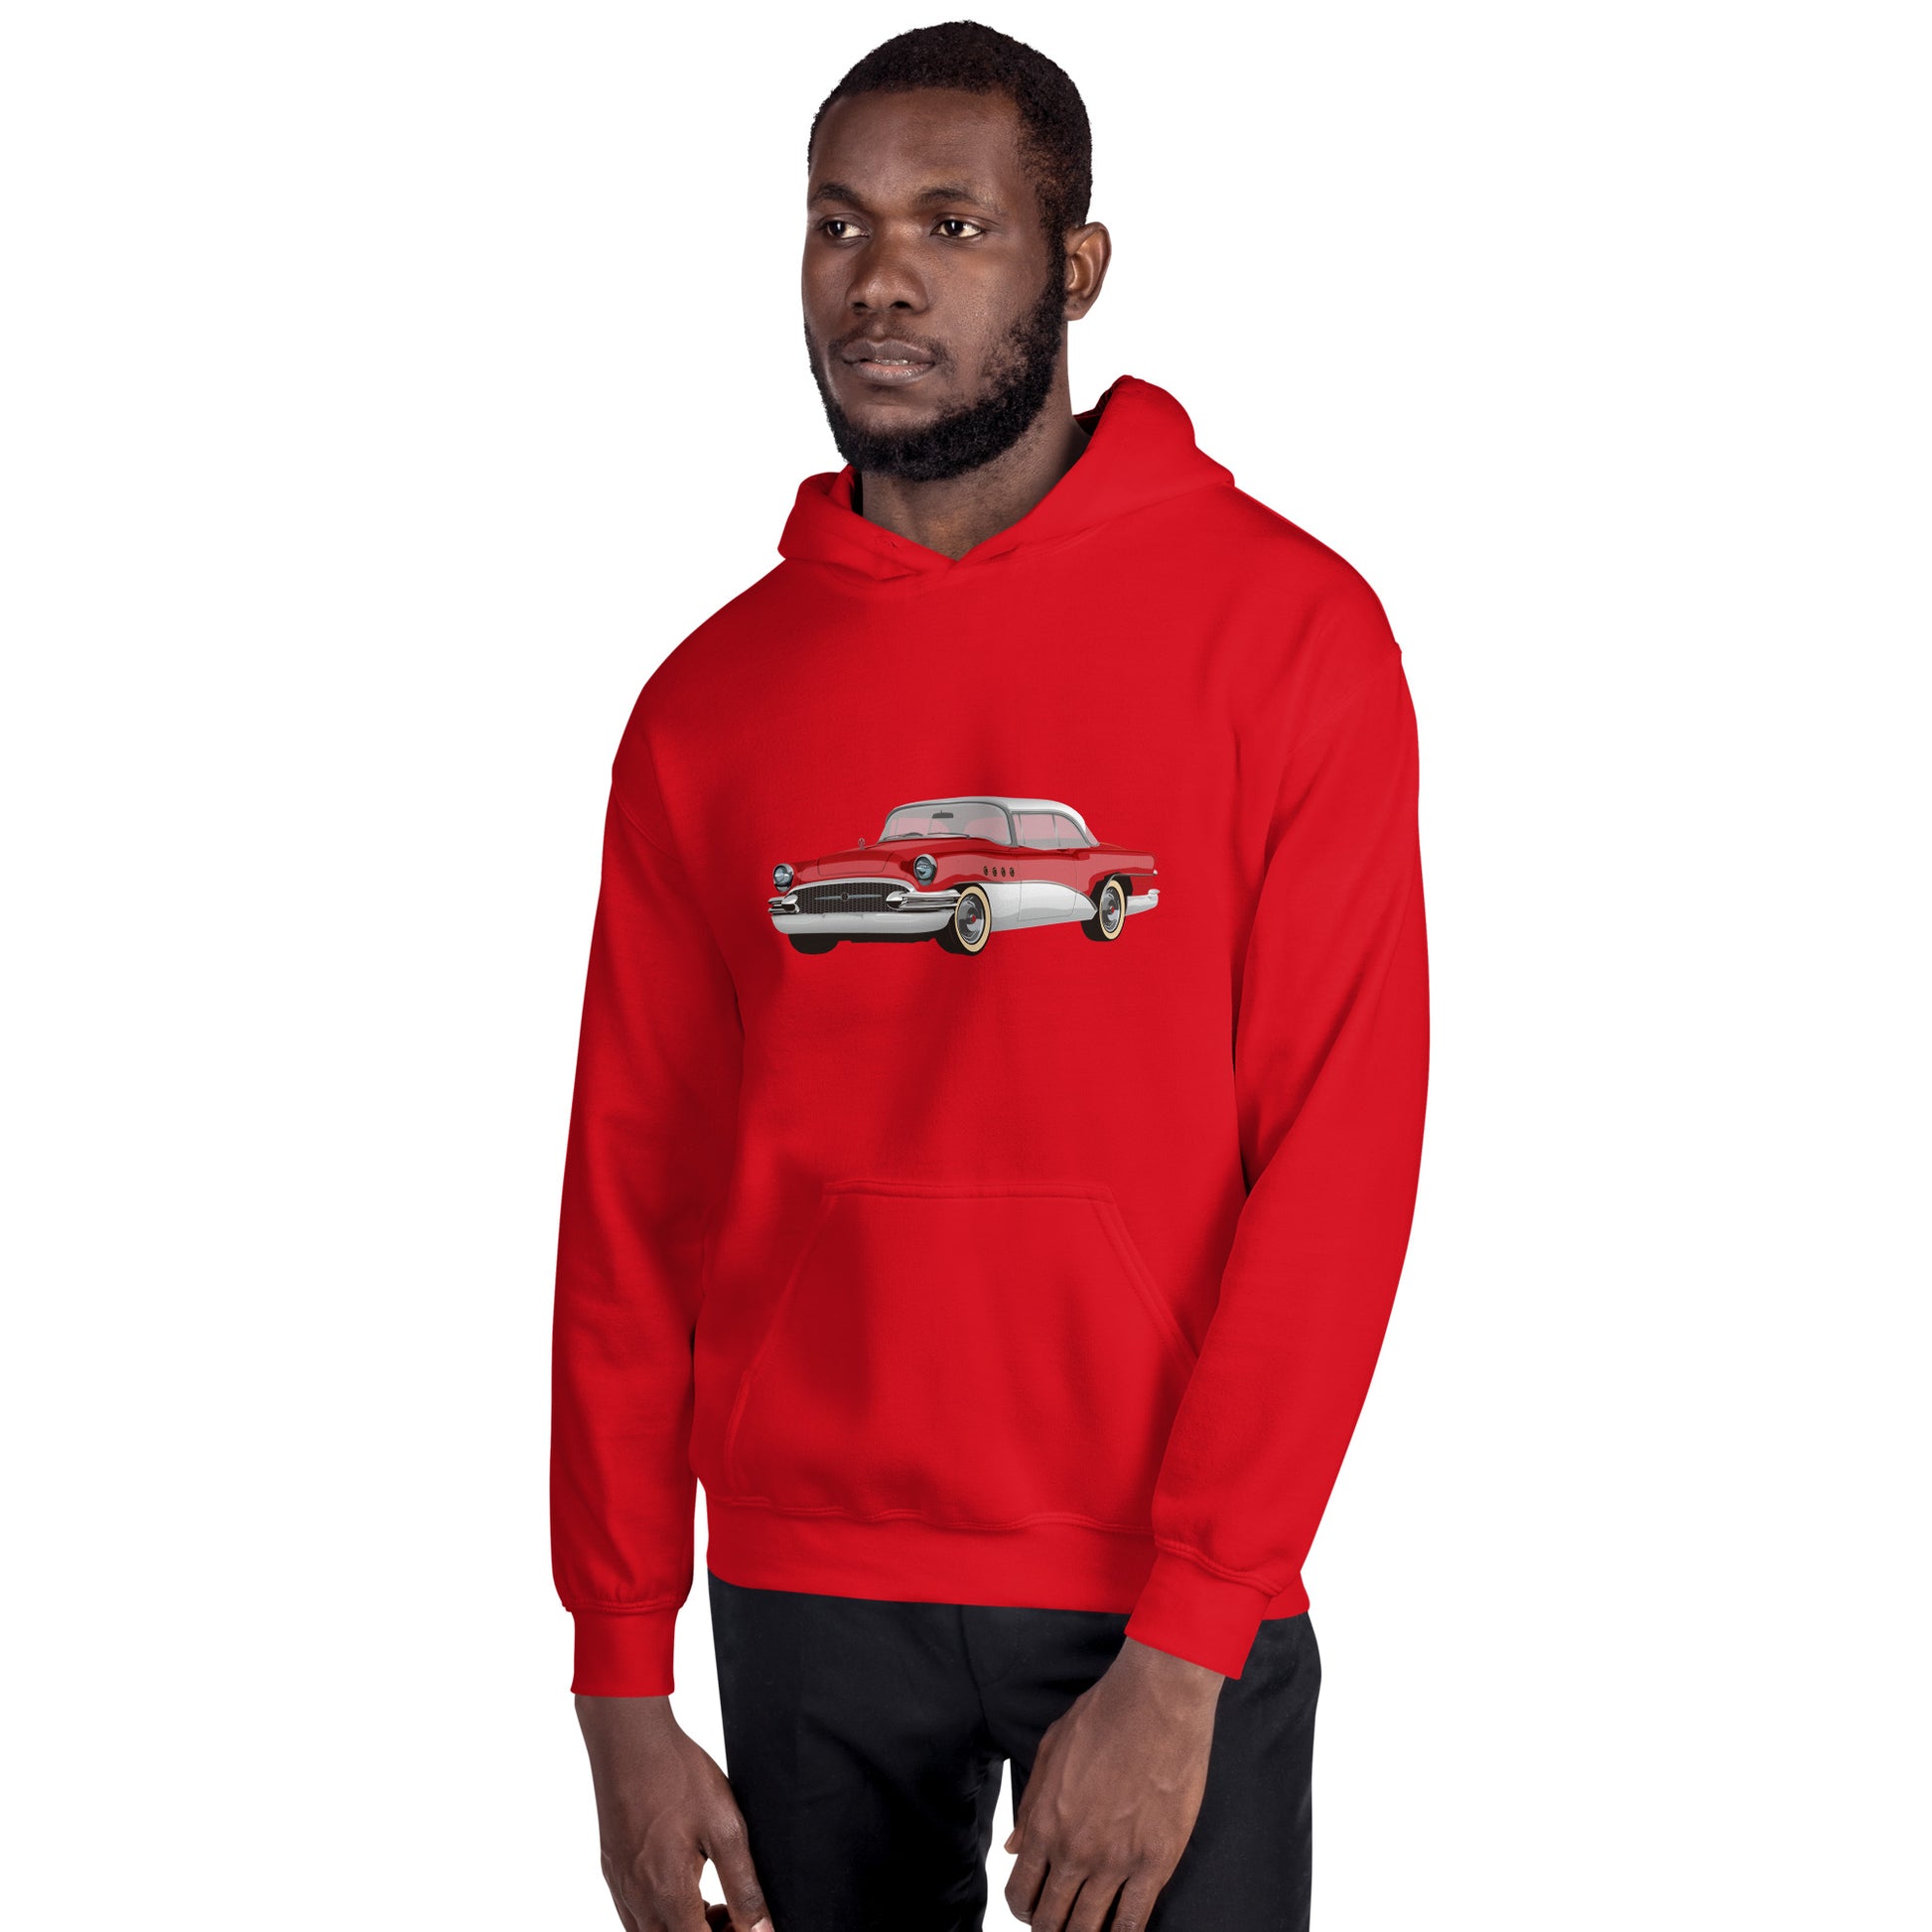 Man with red hoodie with red chevrolet